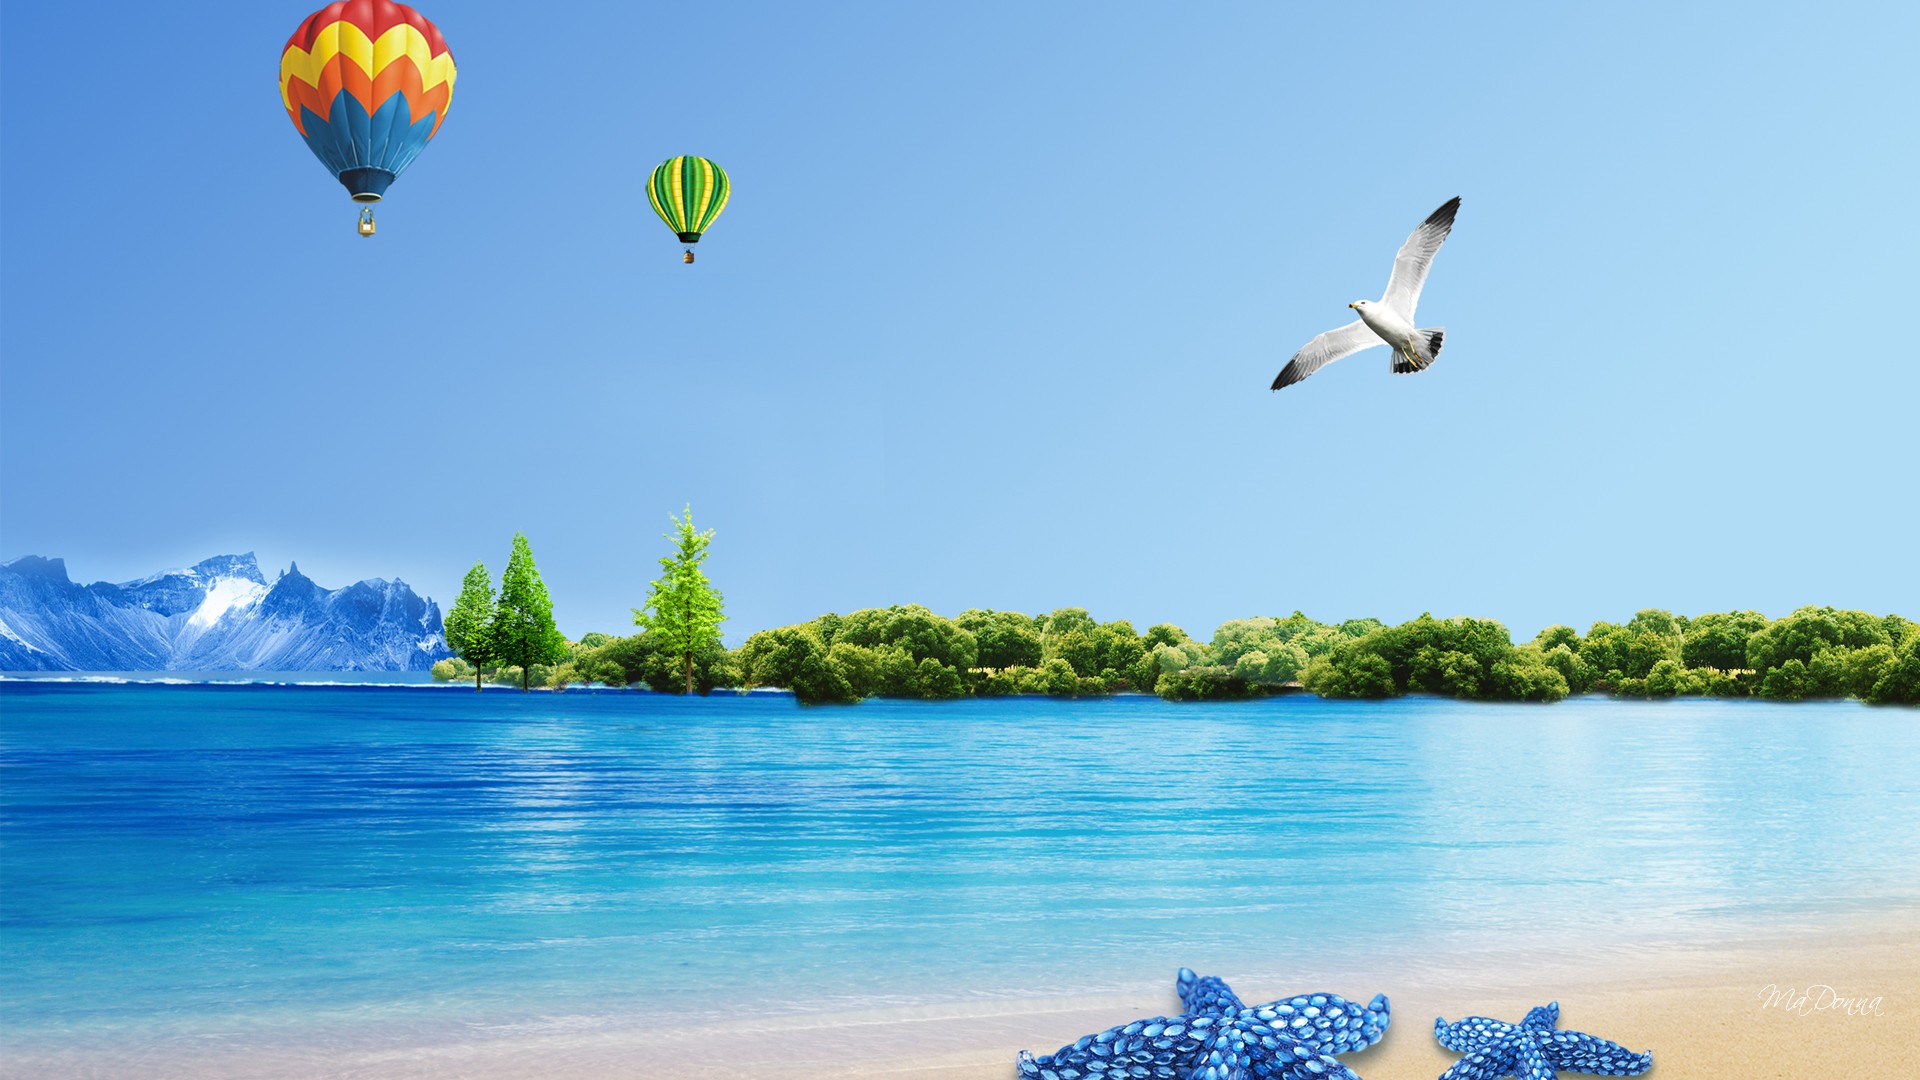 Download Summer Backgrounds Wallpaper pictures in high definition or 1920x1080